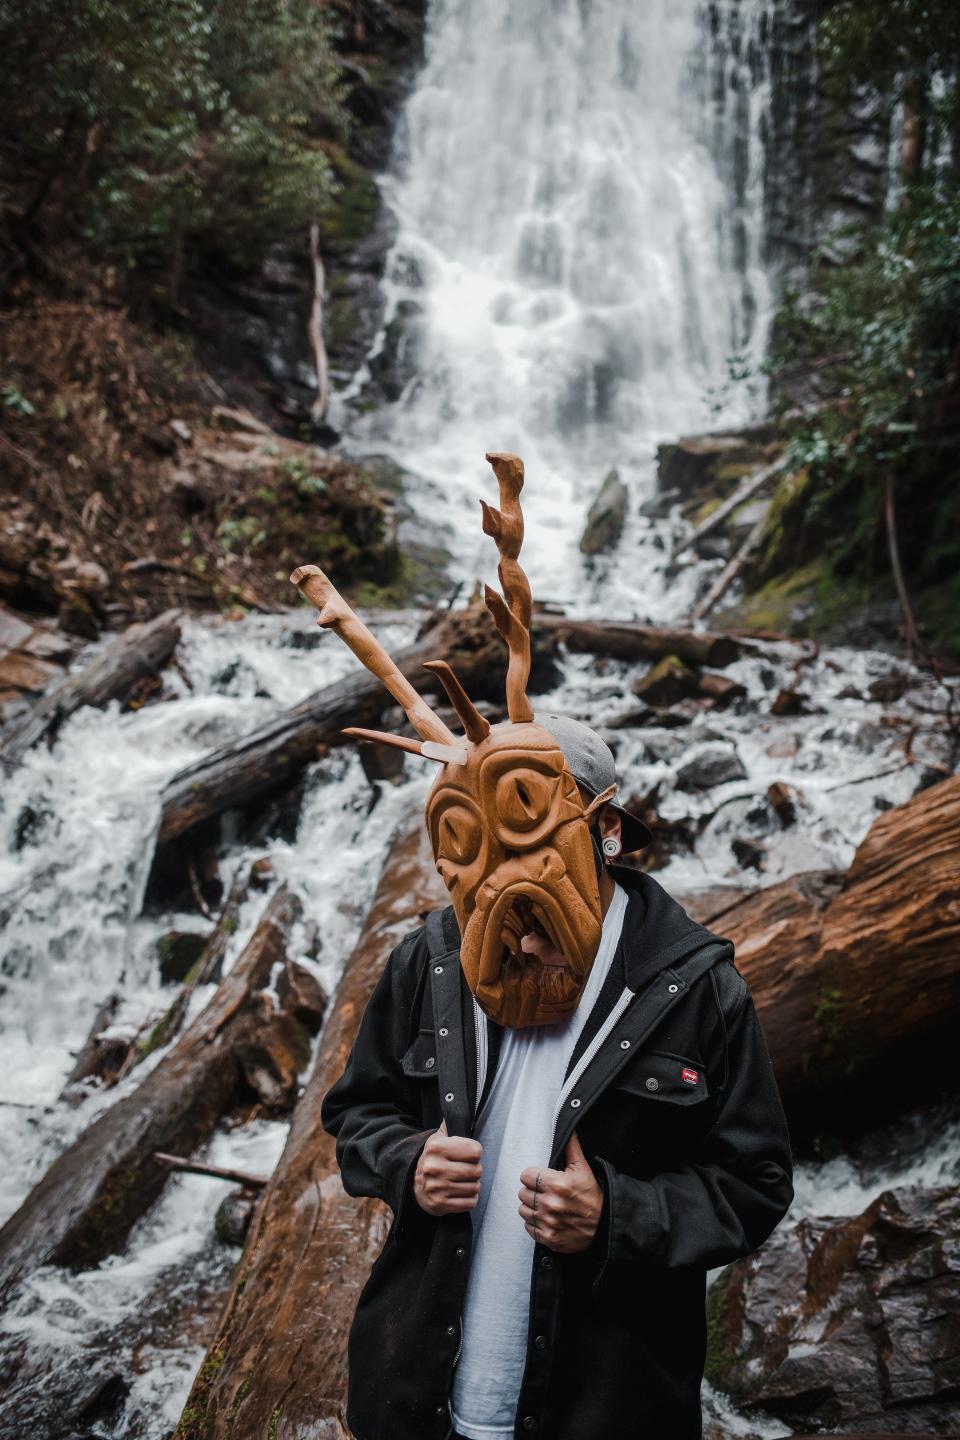 A person wearing a Cherokee booger mask stands in front of a waterfall in a scene from Oklahoma-based Cherokee filmmaker Brit Hensel's short film "ᎤᏕᏲᏅ" (pronounced oo-de-yo-NUH). Hensel's short was recently featured at the 2022 Sundance Film Festival. According to the Sundance Institute, Hensel is the first woman who is a citizen of the Cherokee Nation to direct an official selection at the festival. Photo by Loren Waters (Cherokee Nation)